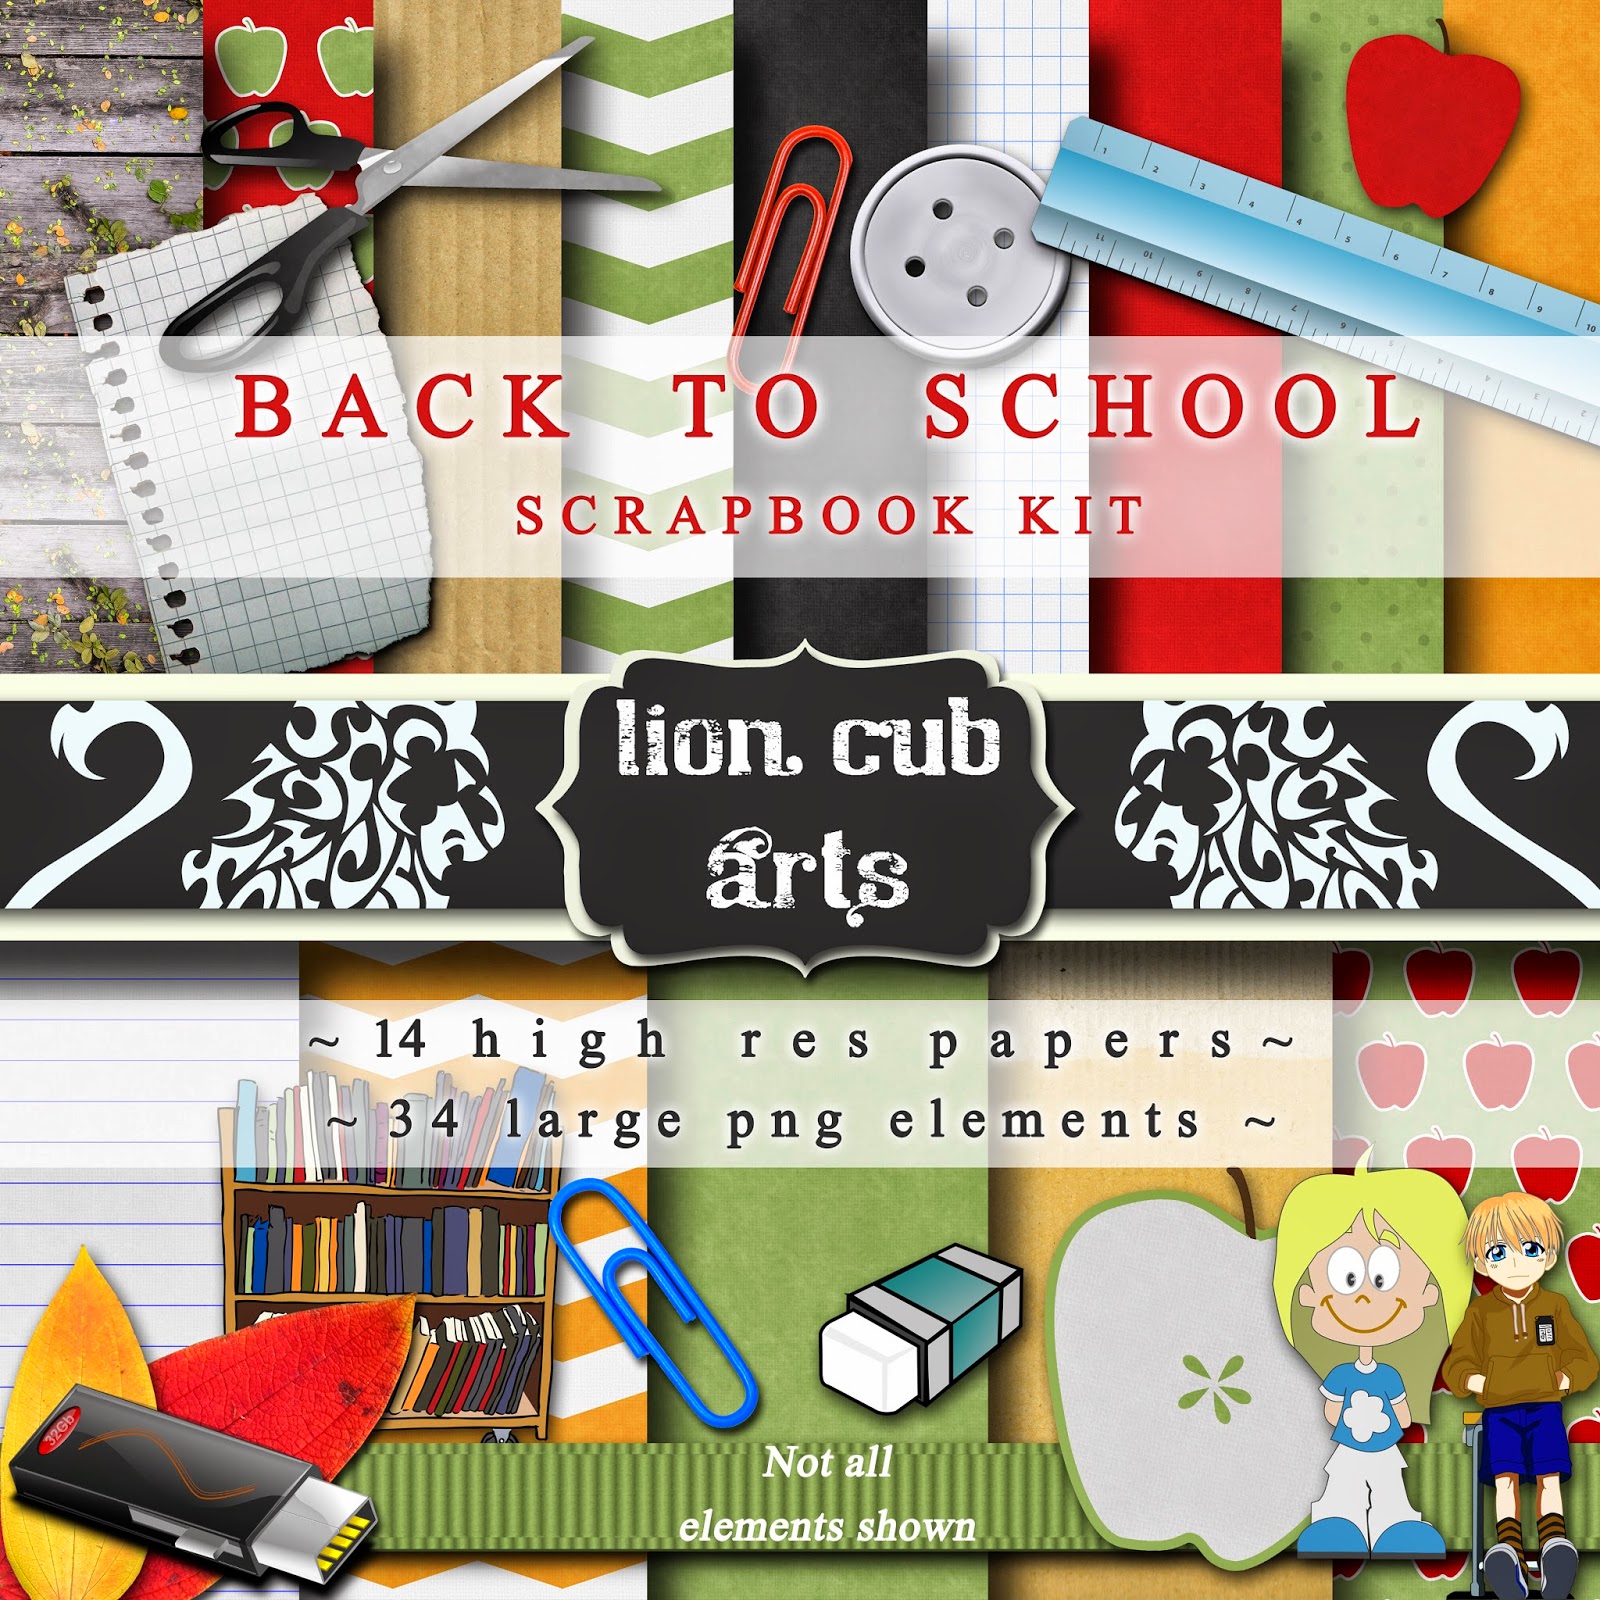 https://www.etsy.com/listing/196656508/back-to-school-fall-scrapbook-kit-14?ref=shop_home_feat_2